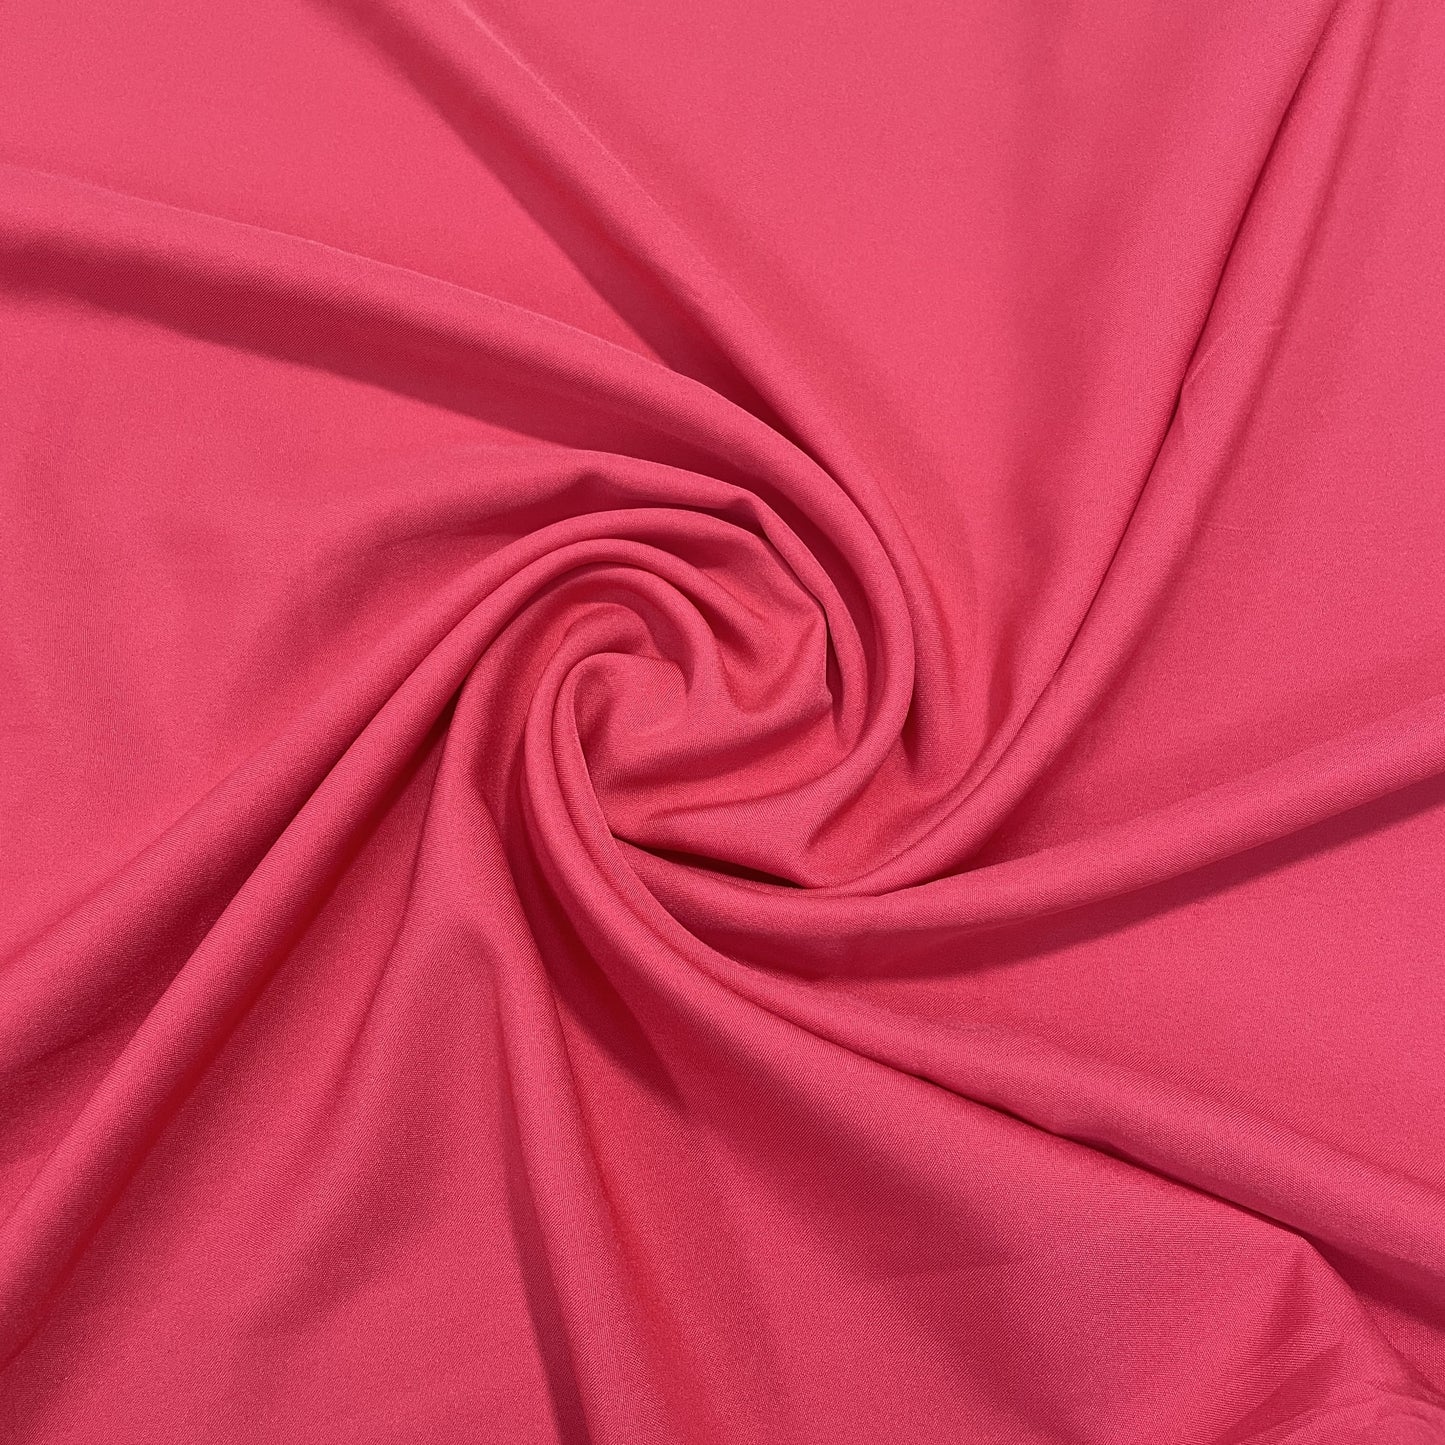 Exclusive Hot Pink Solid Malai Crepe Fabric